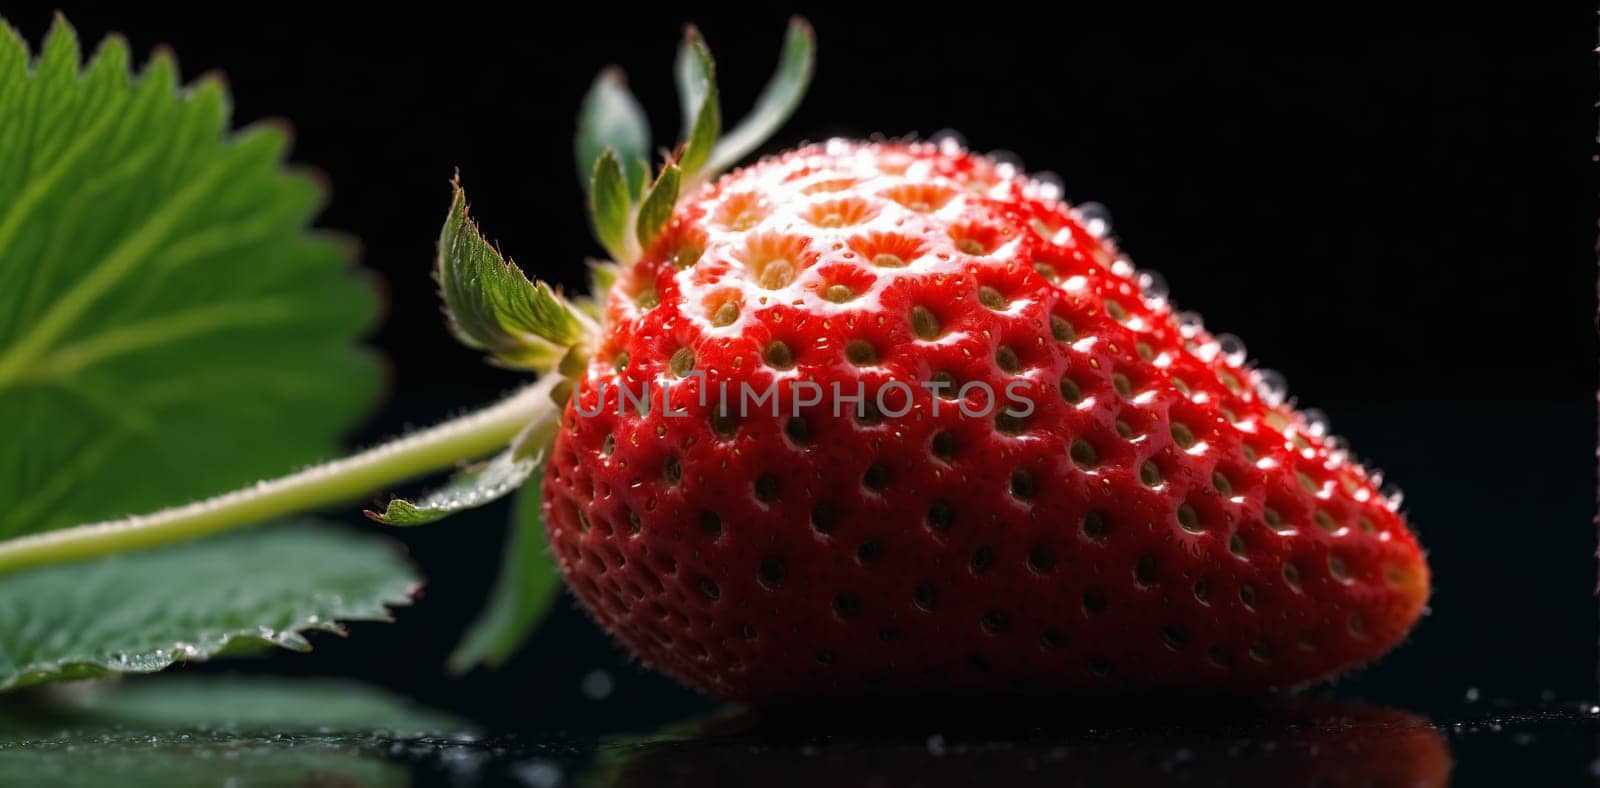 Strawberry on a black background, close-up, macro by Andre1ns